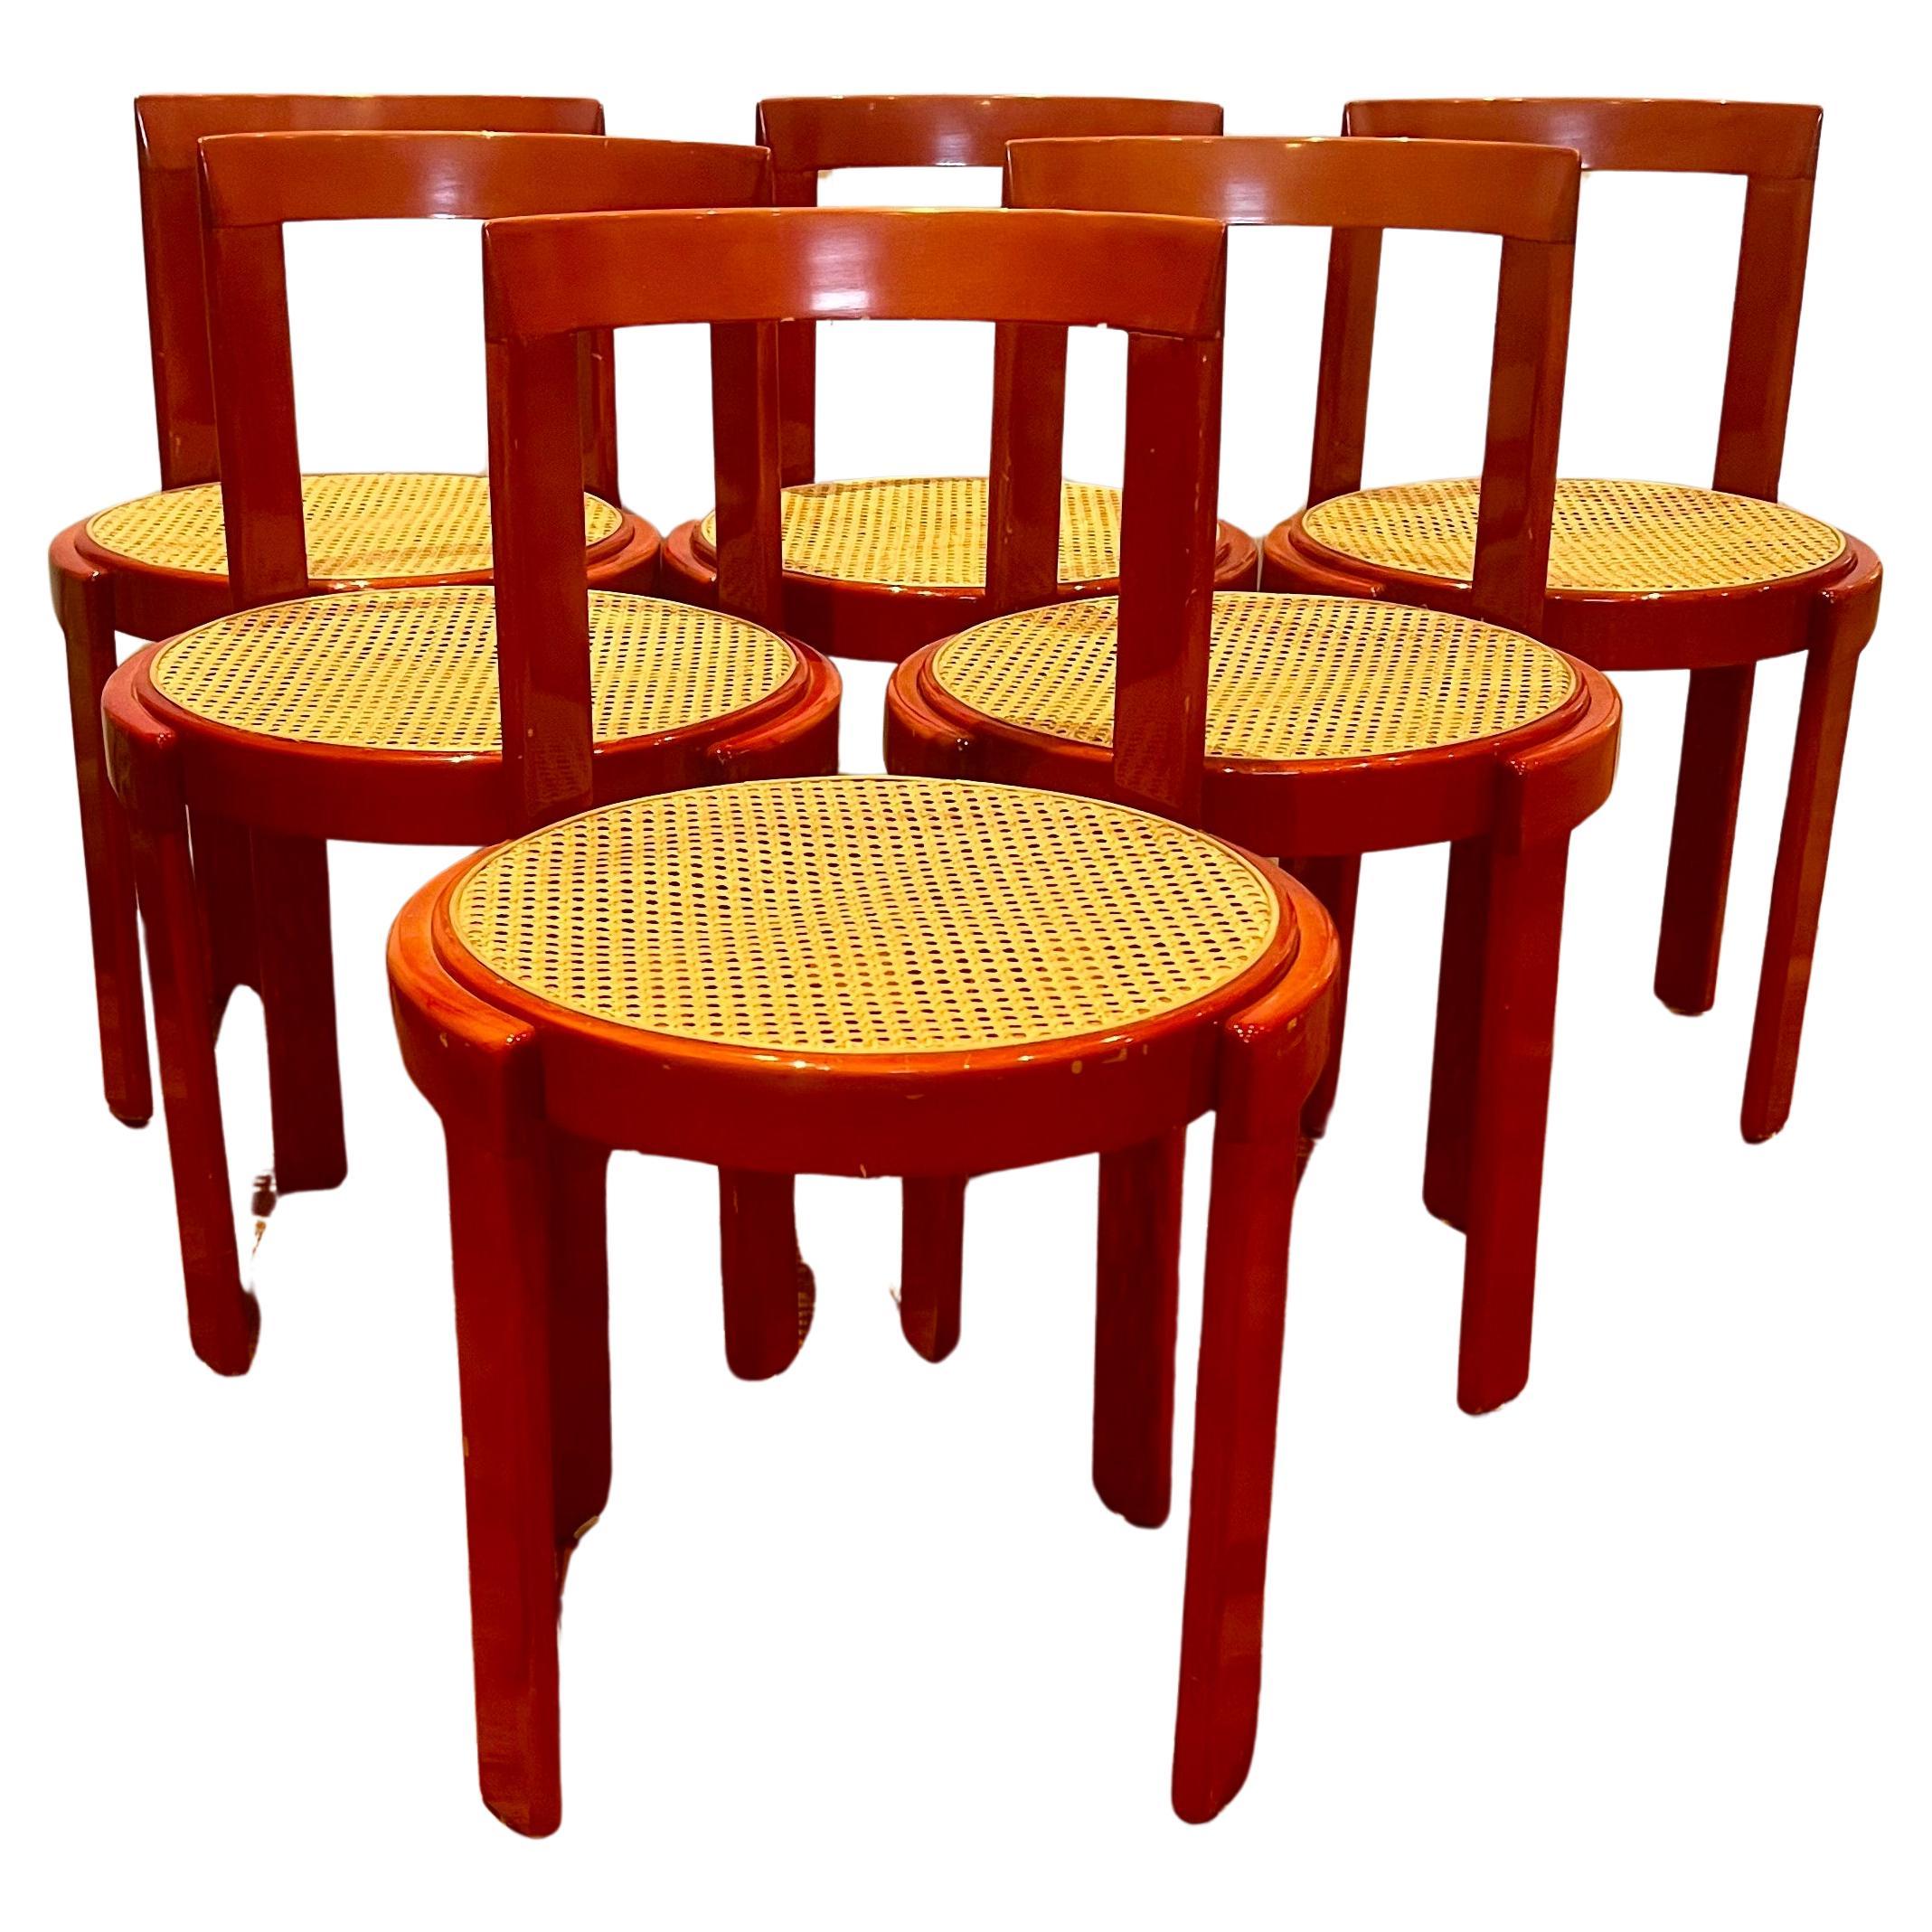 Italian Bentwood Caned Set of 6 Red Lacquered Chairs Mid Century Modernist For Sale